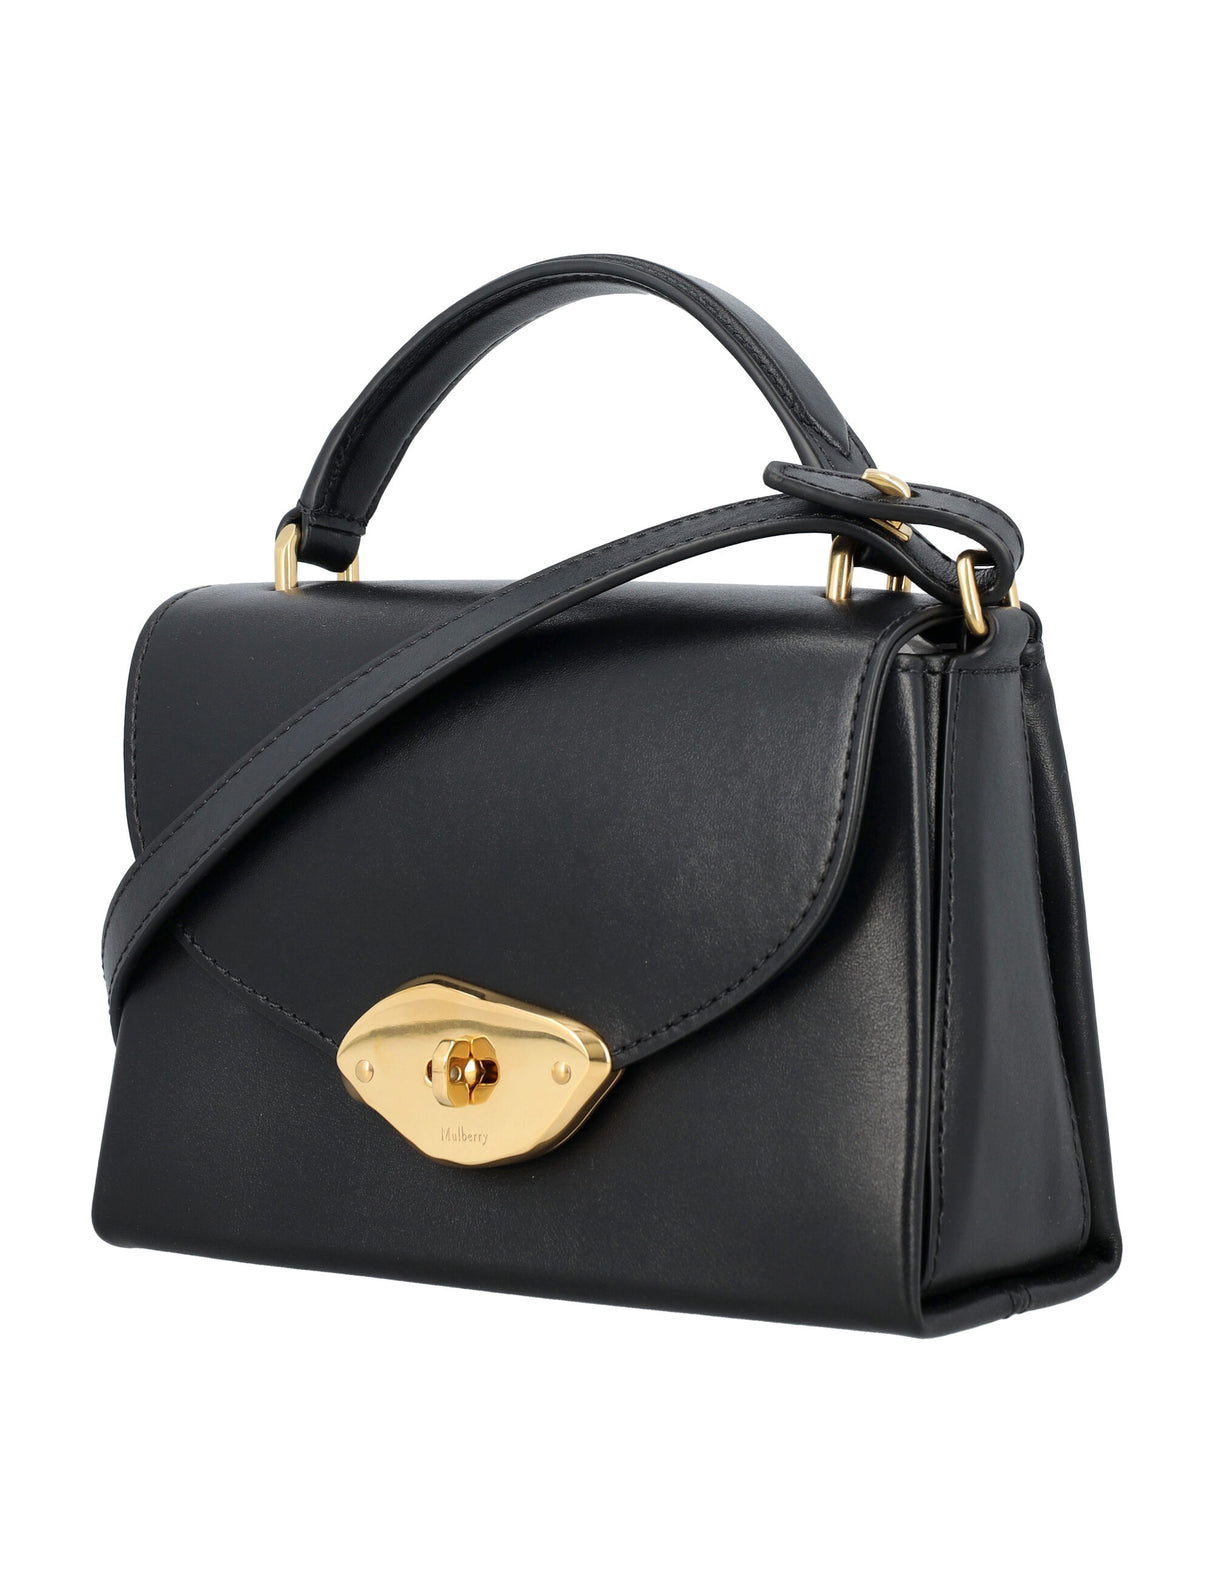 MULBERRY Chic Mini Wool Top-Handle Handbag with Brass Accents and Adjustable Strap - Black